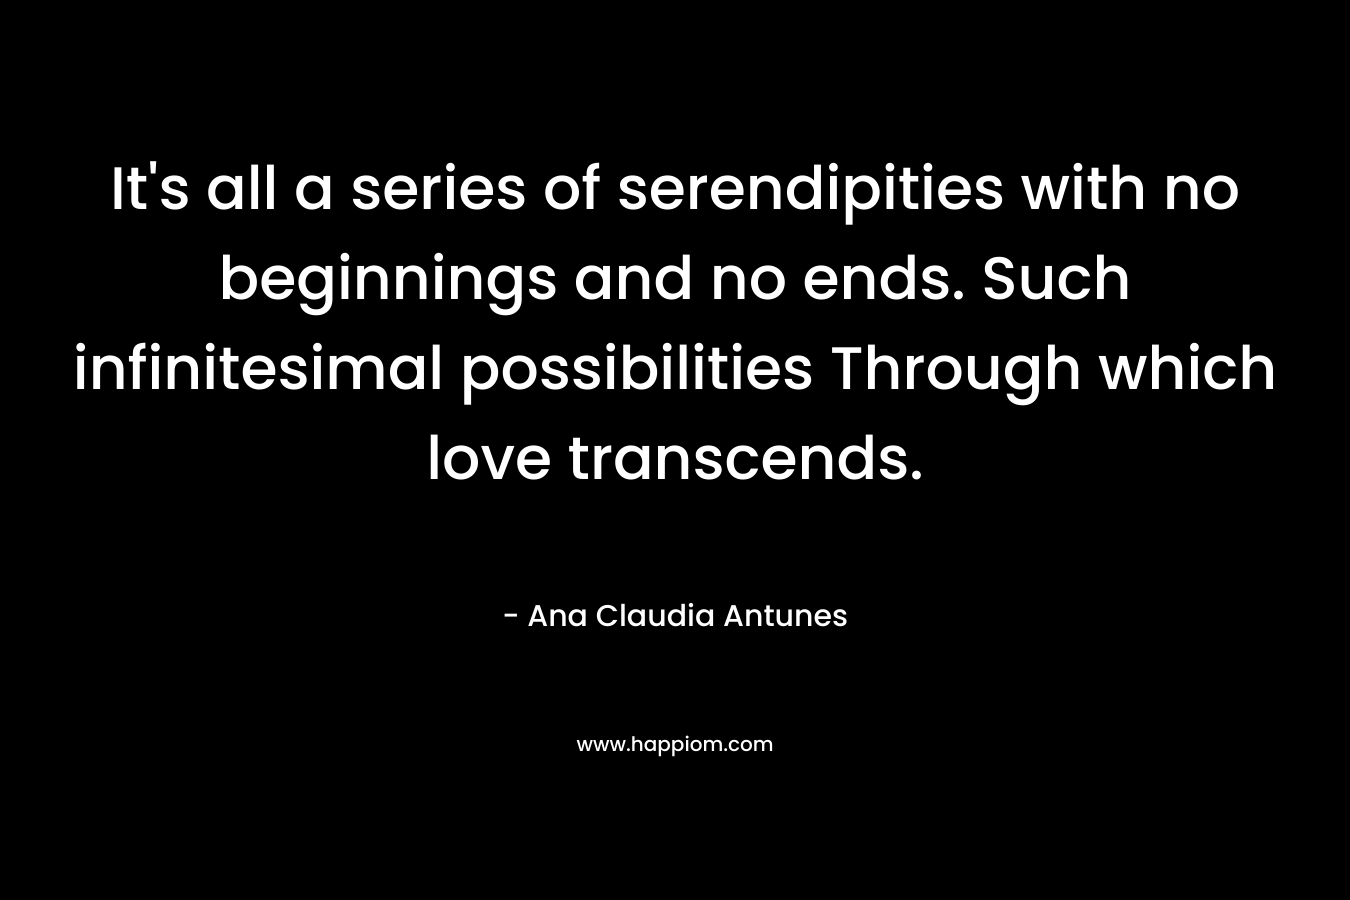 It's all a series of serendipities with no beginnings and no ends. Such infinitesimal possibilities Through which love transcends.